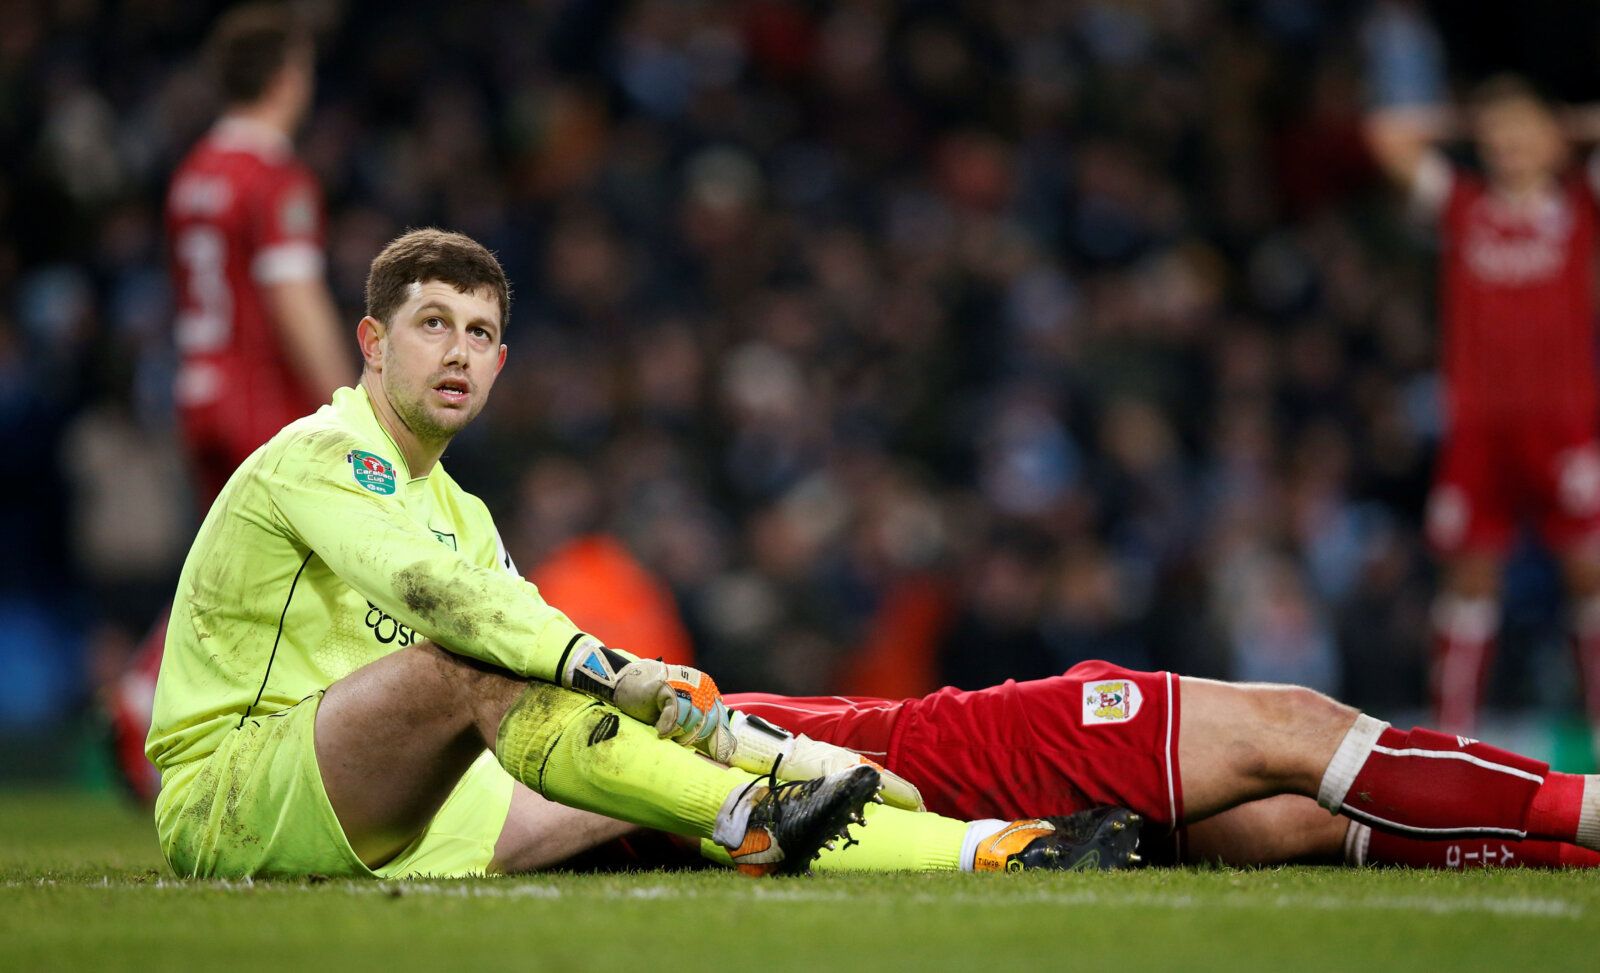 Soccer Football - Carabao Cup Semi Final First Leg - Manchester City vs Bristol City - Etihad Stadium, Manchester, Britain - January 9, 2018   Bristol City's Frank Fielding looks dejected after Manchester City's second goal    REUTERS/Andrew Yates    EDITORIAL USE ONLY. No use with unauthorized audio, video, data, fixture lists, club/league logos or 